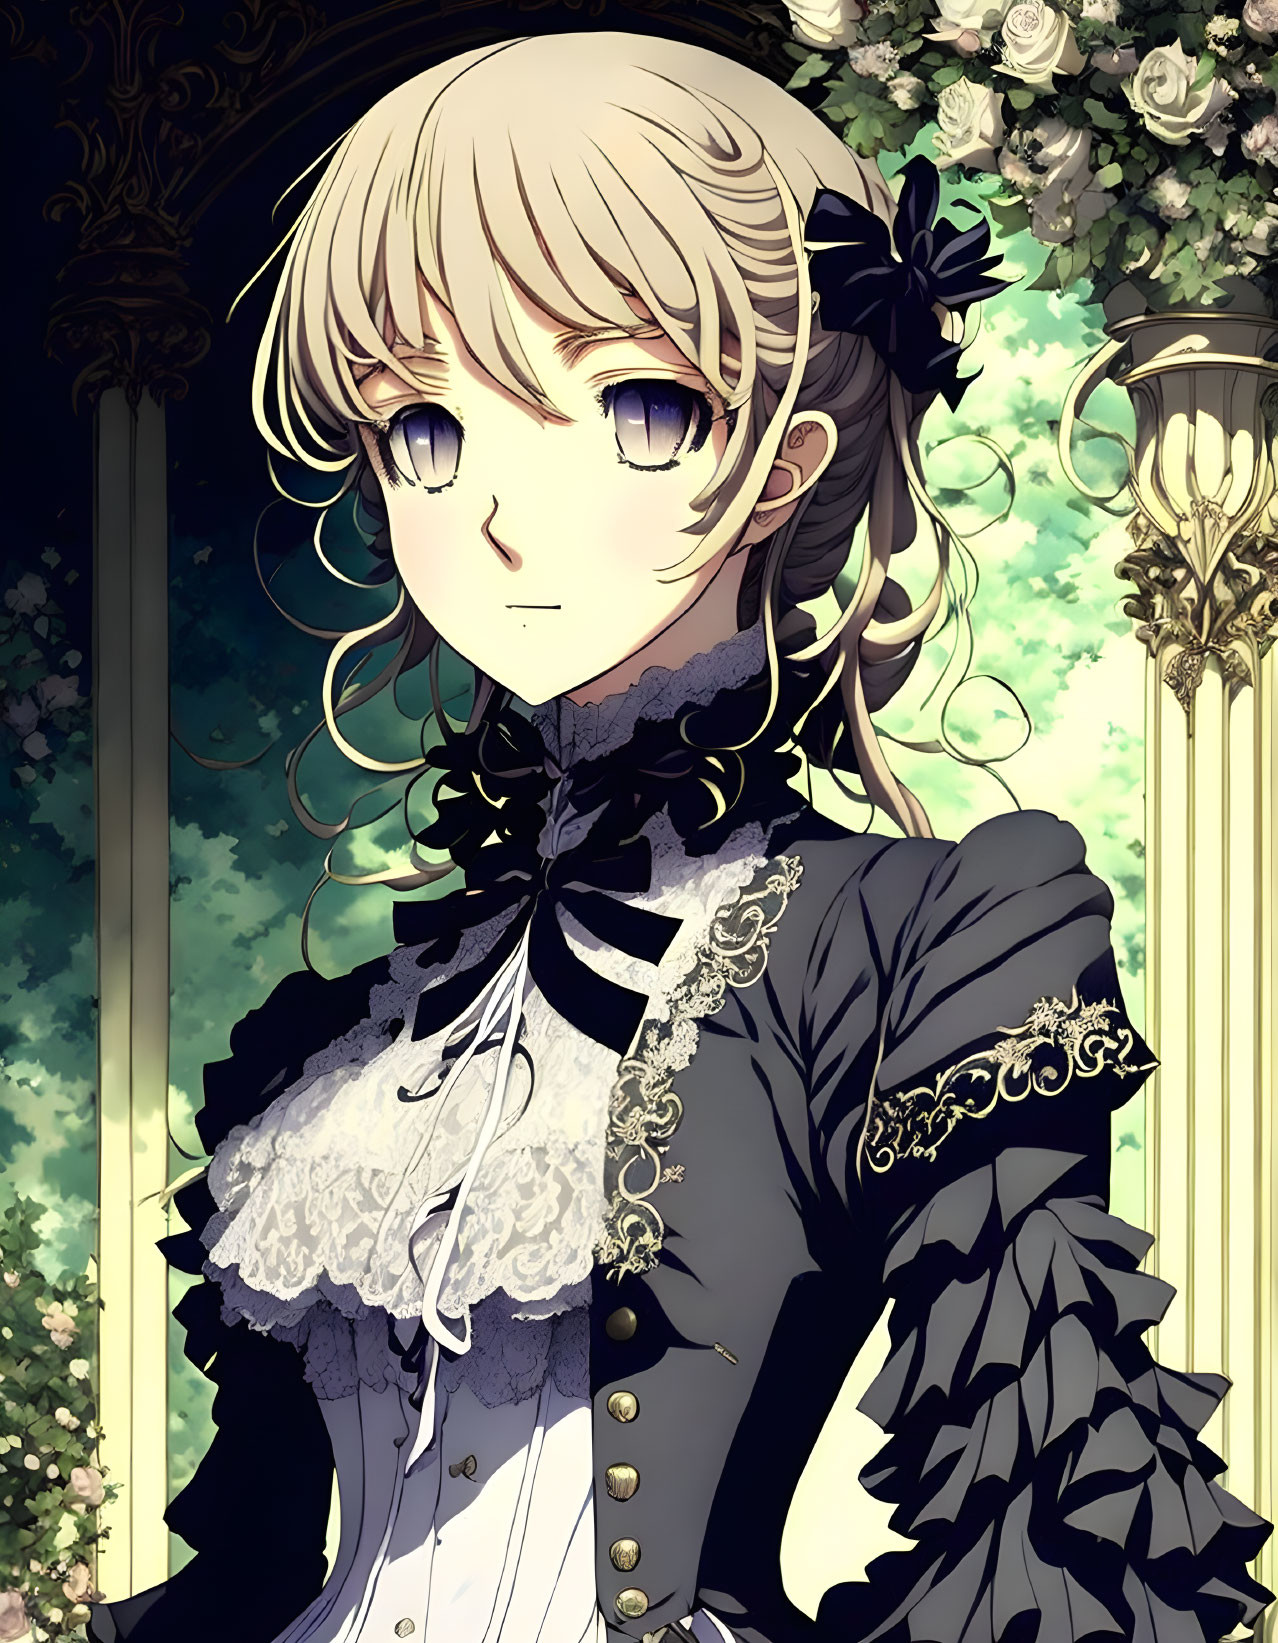 Blond girl in Victorian-style dress with floral backdrop